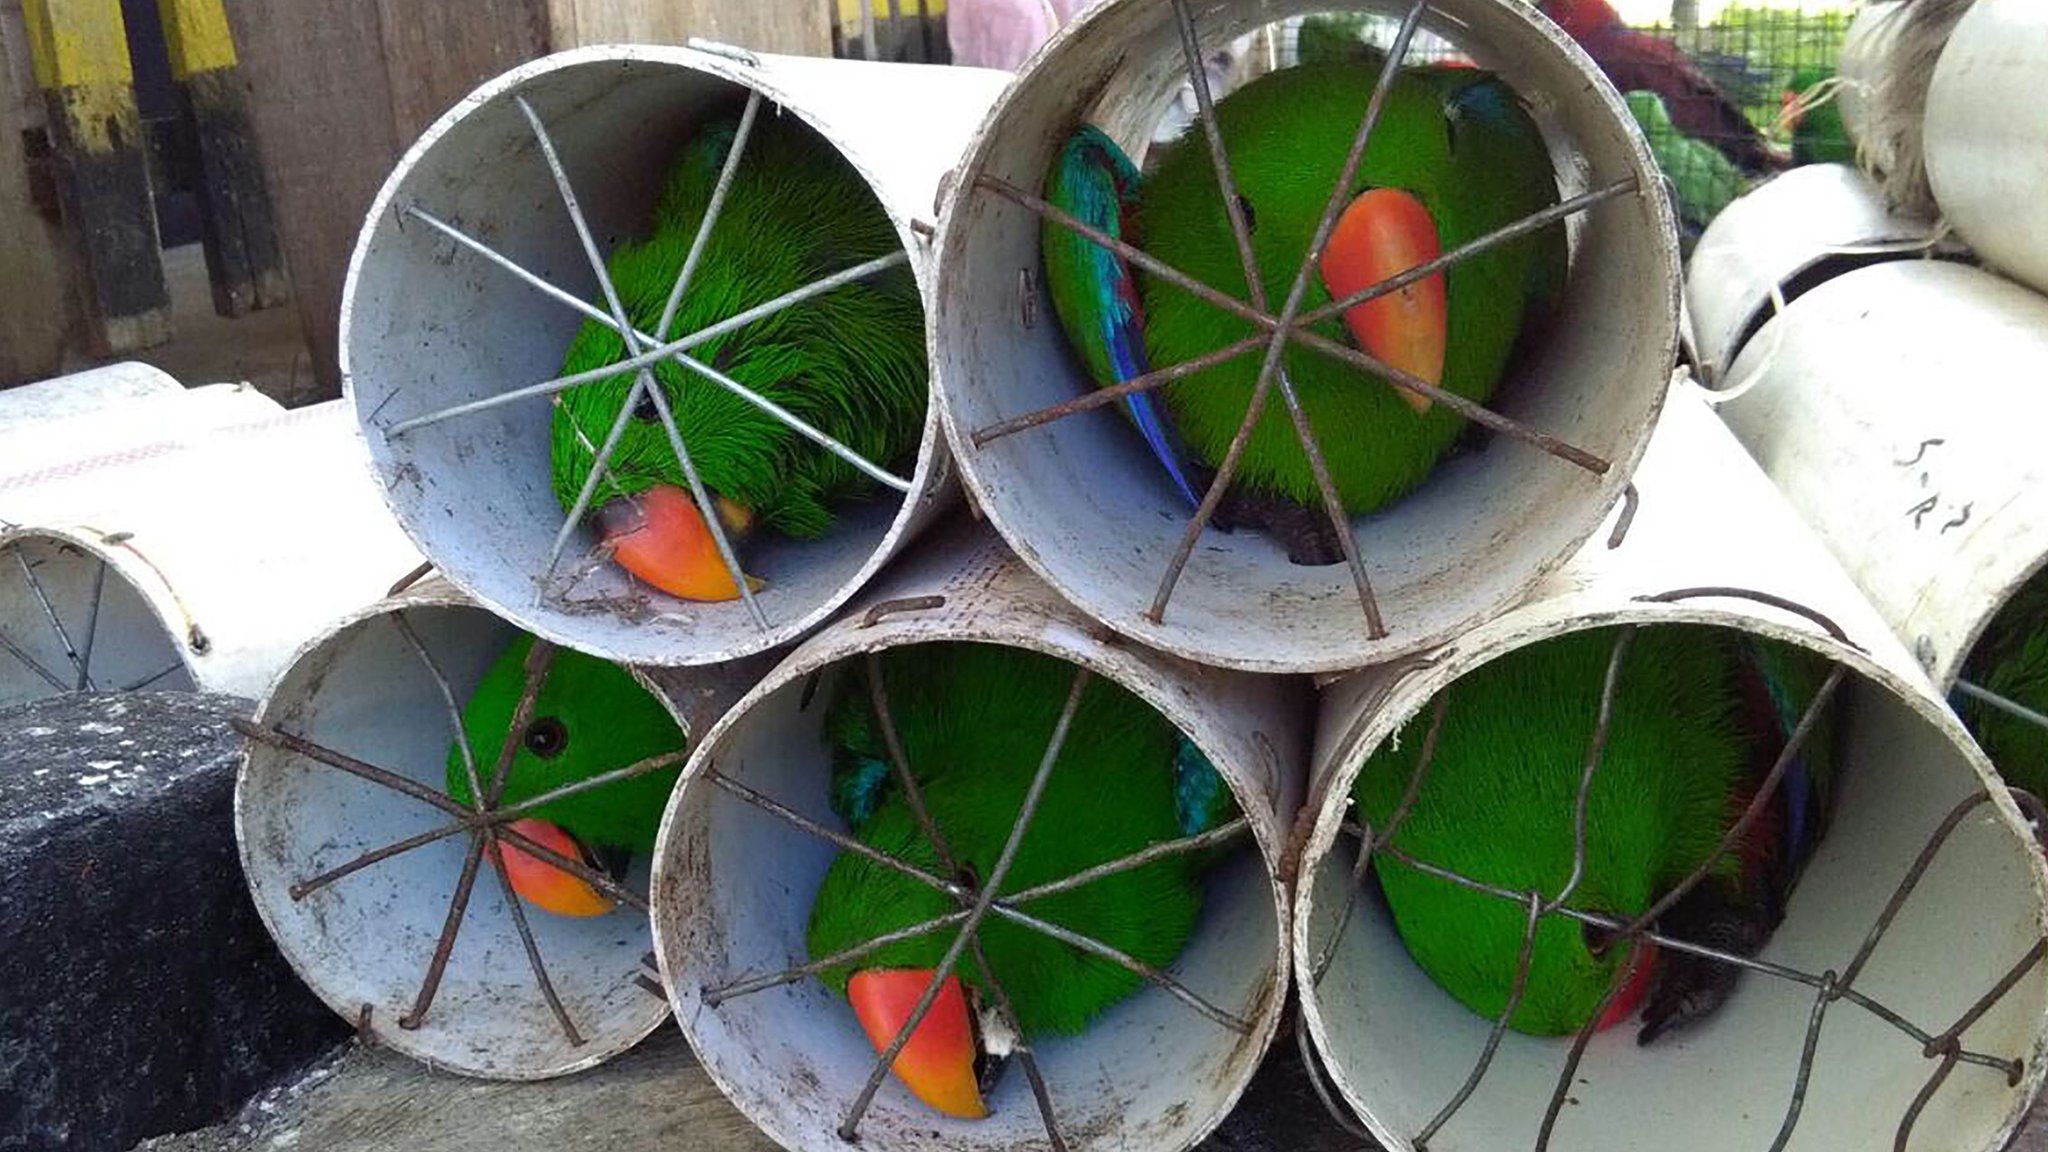 Eclectus parrots stuffed inside drainage pipes following a raid